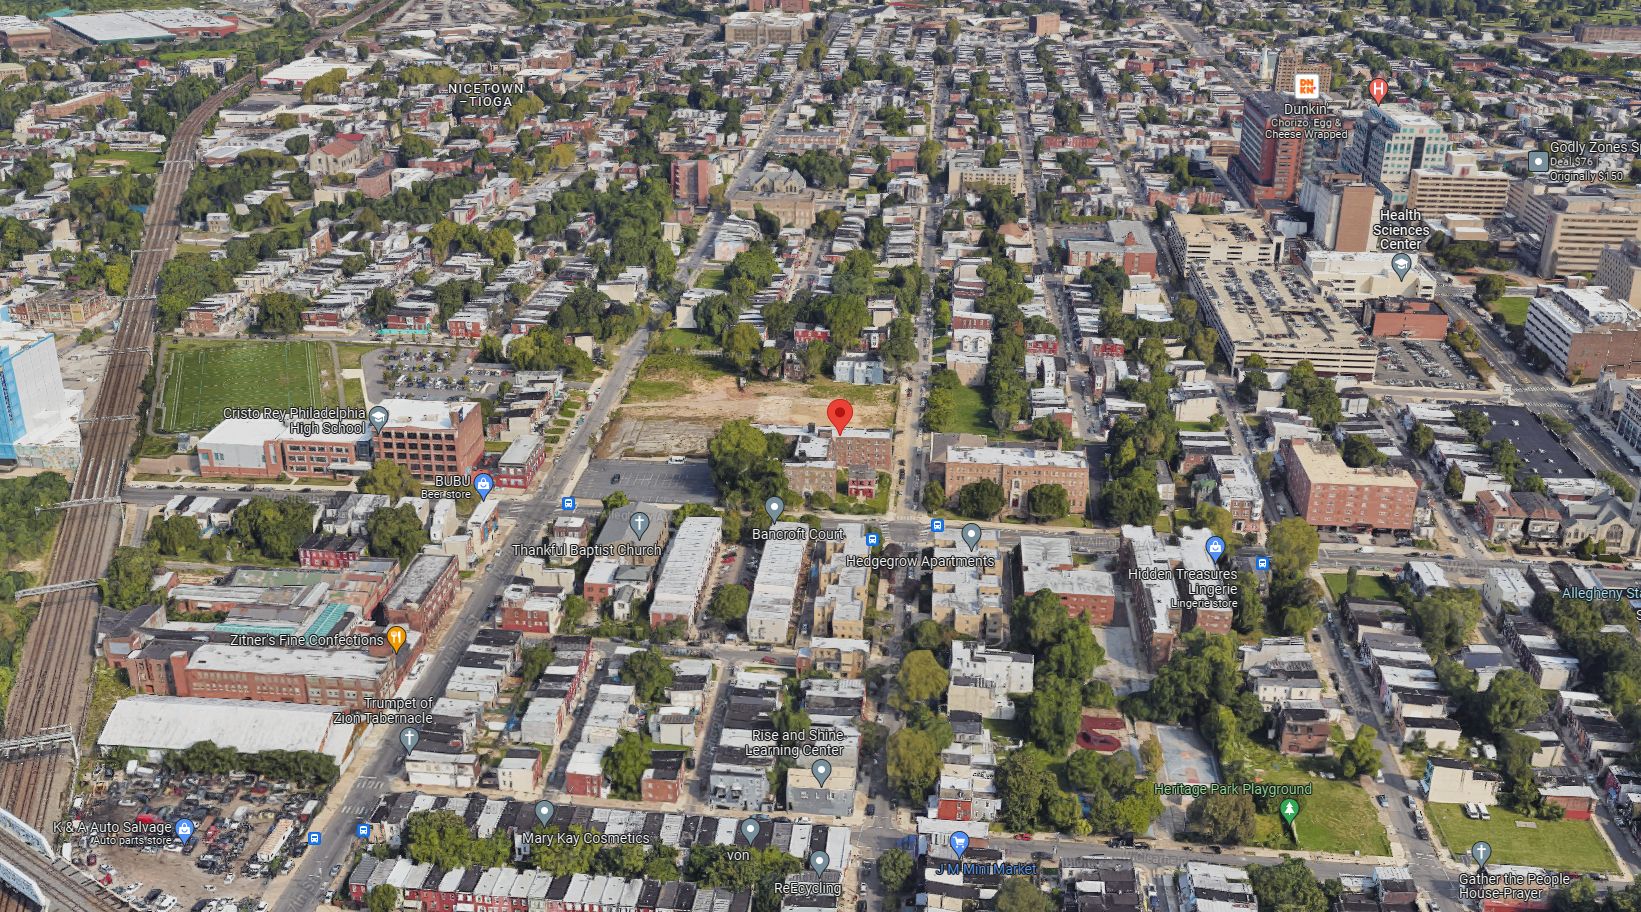 3216 North 16th Street. Aerial view. Looking north. Credit: Google Maps